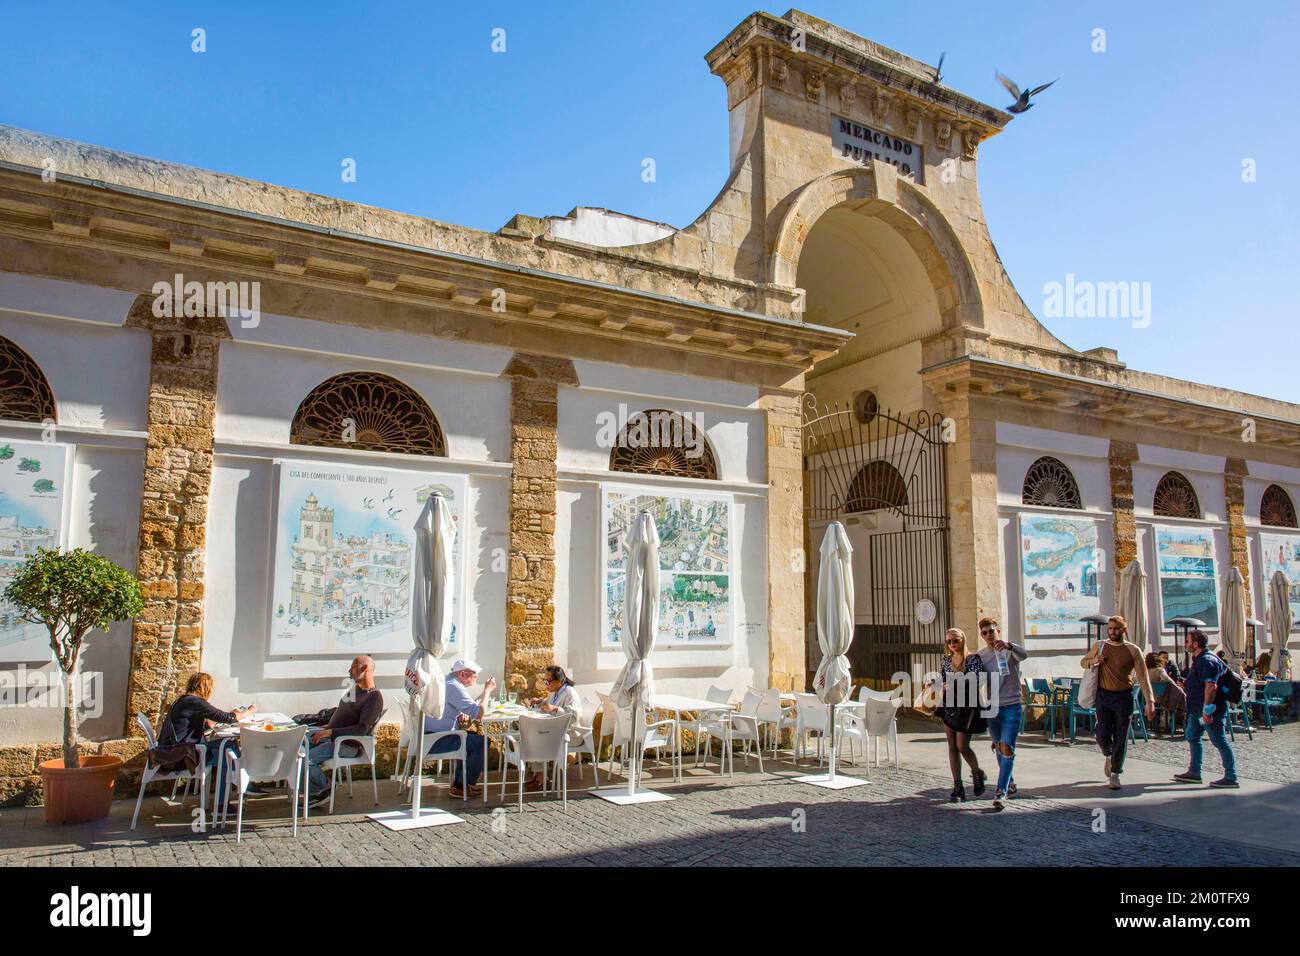 Spain, Andalusia, Cadiz, central market, restaurant terraces set up in front of the central market decorated with drawings of the city Stock Photo